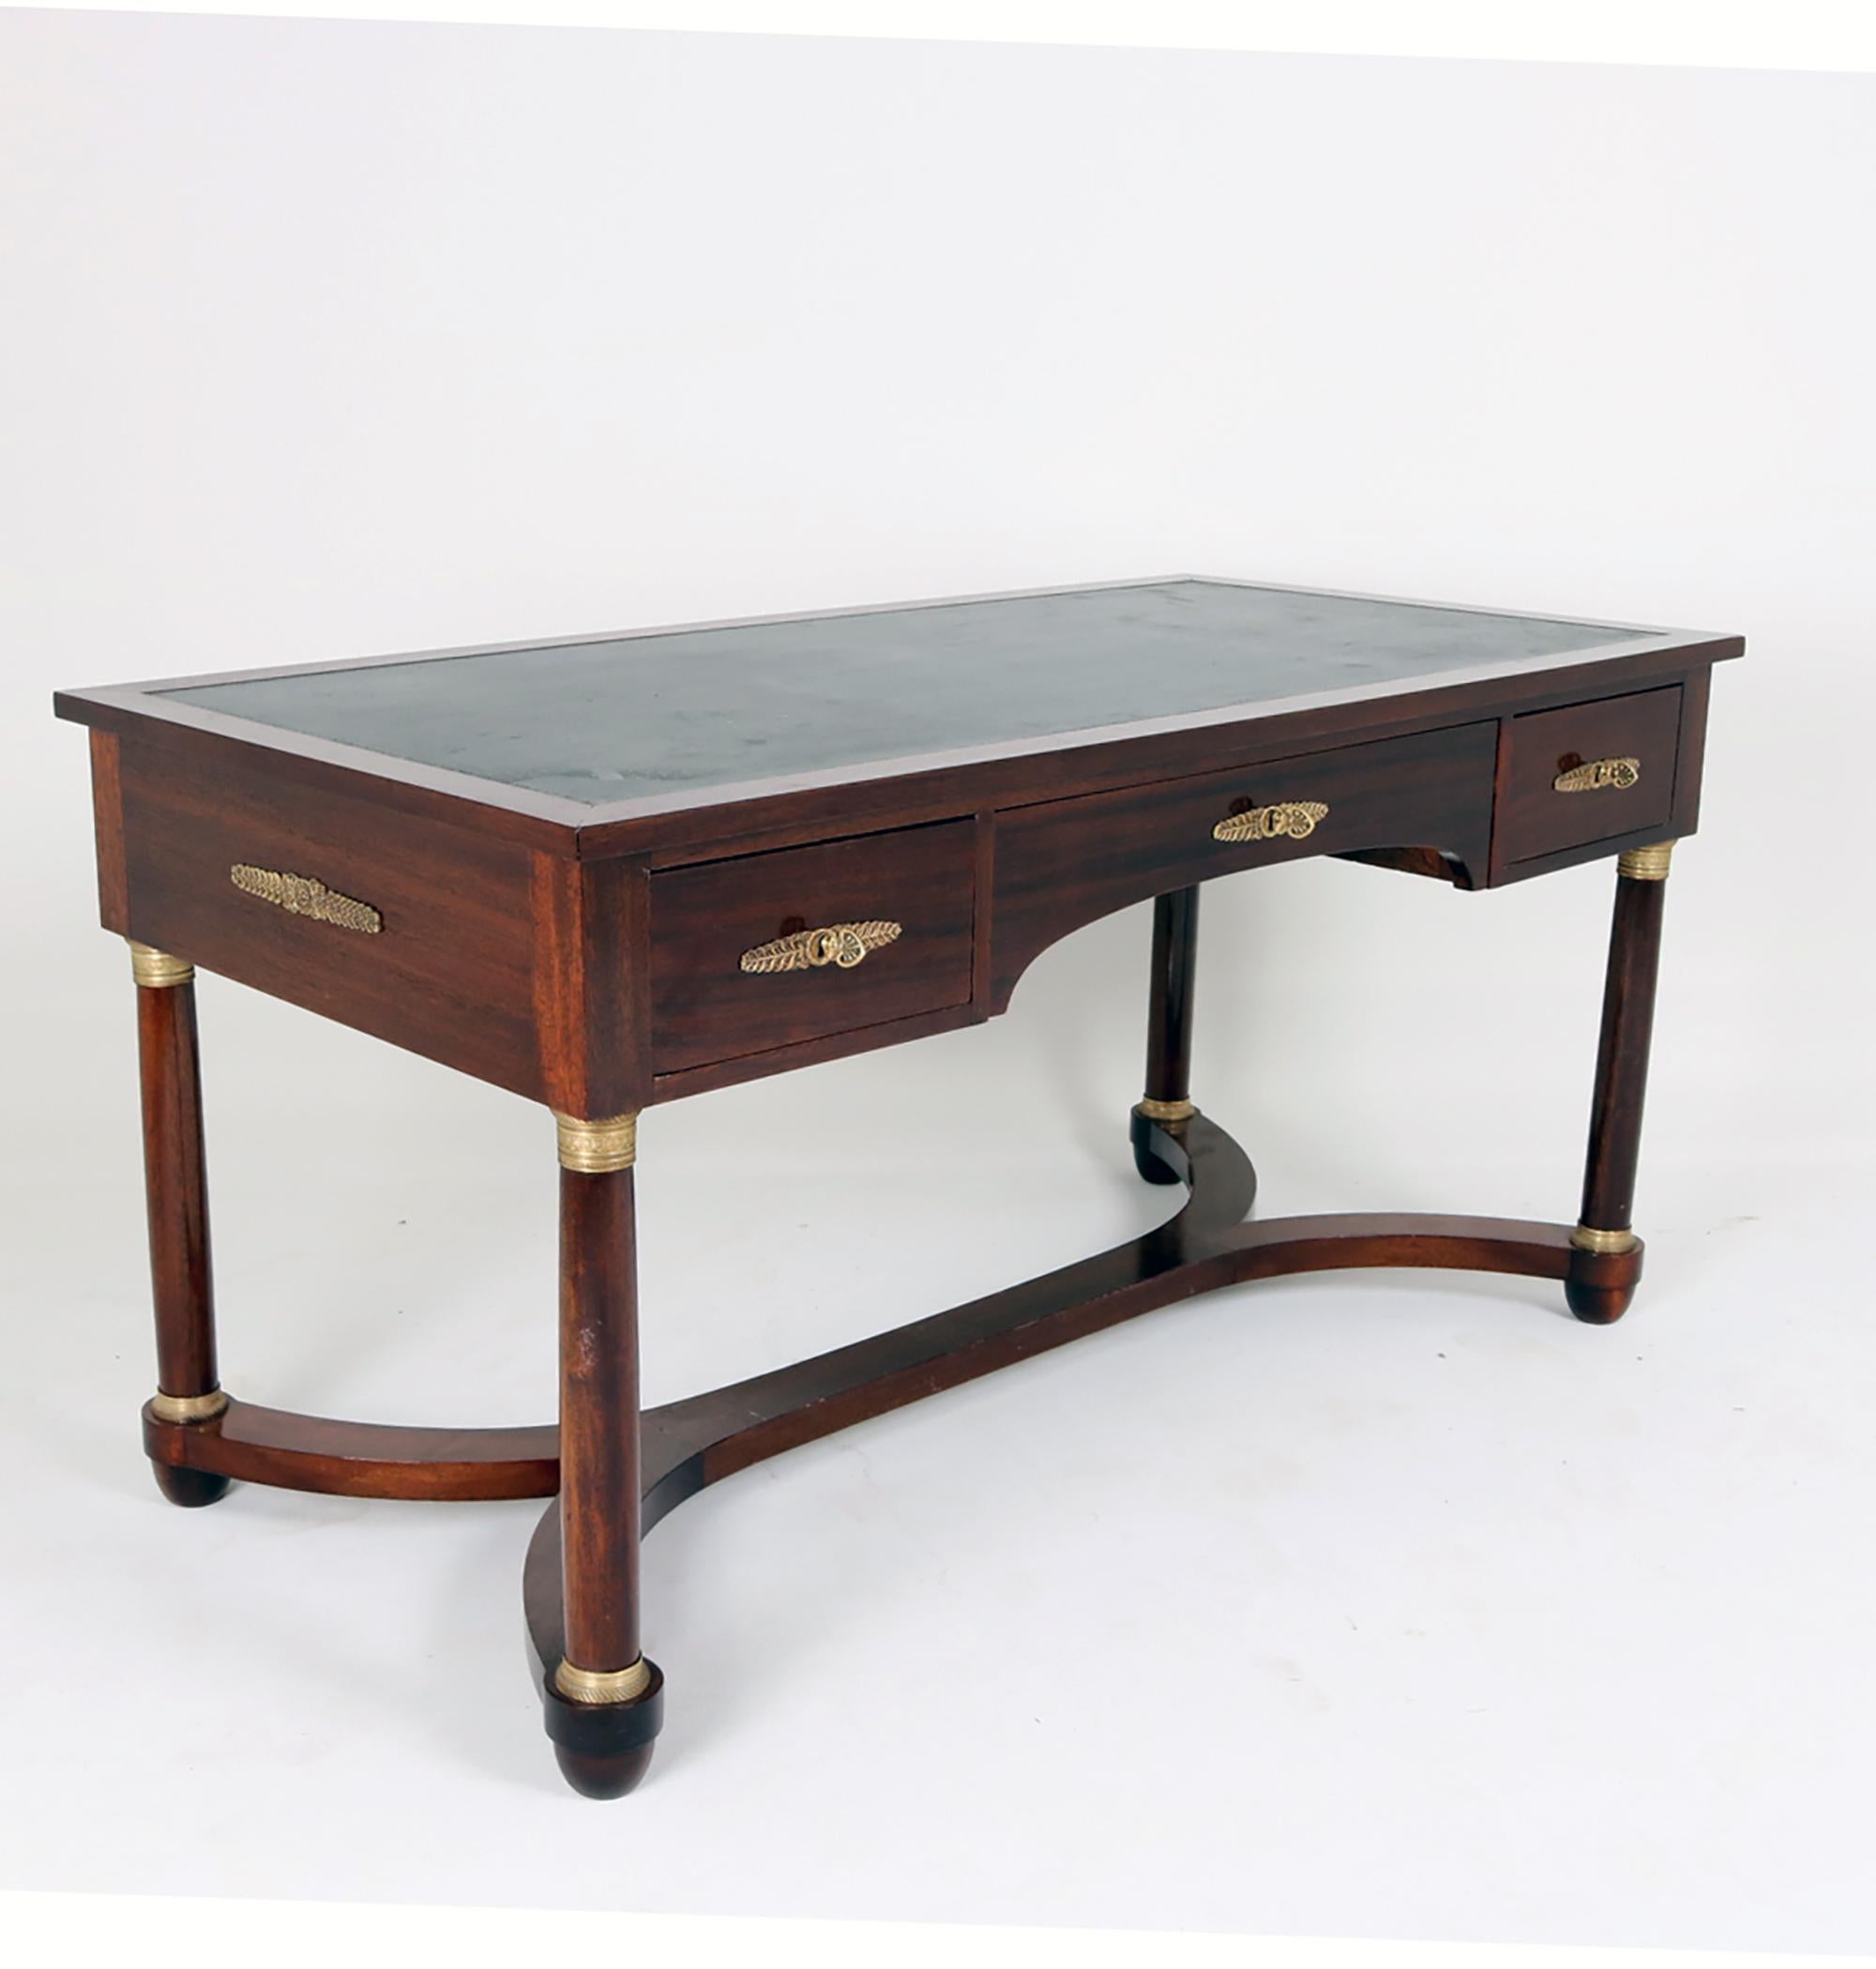 Empire desk with mahogany veneer, decorated with numerous brass applications. The surface of the furniture is finished with polish, giving a subtle gloss. The table top is covered with practical leather.
The condition of this desc is very